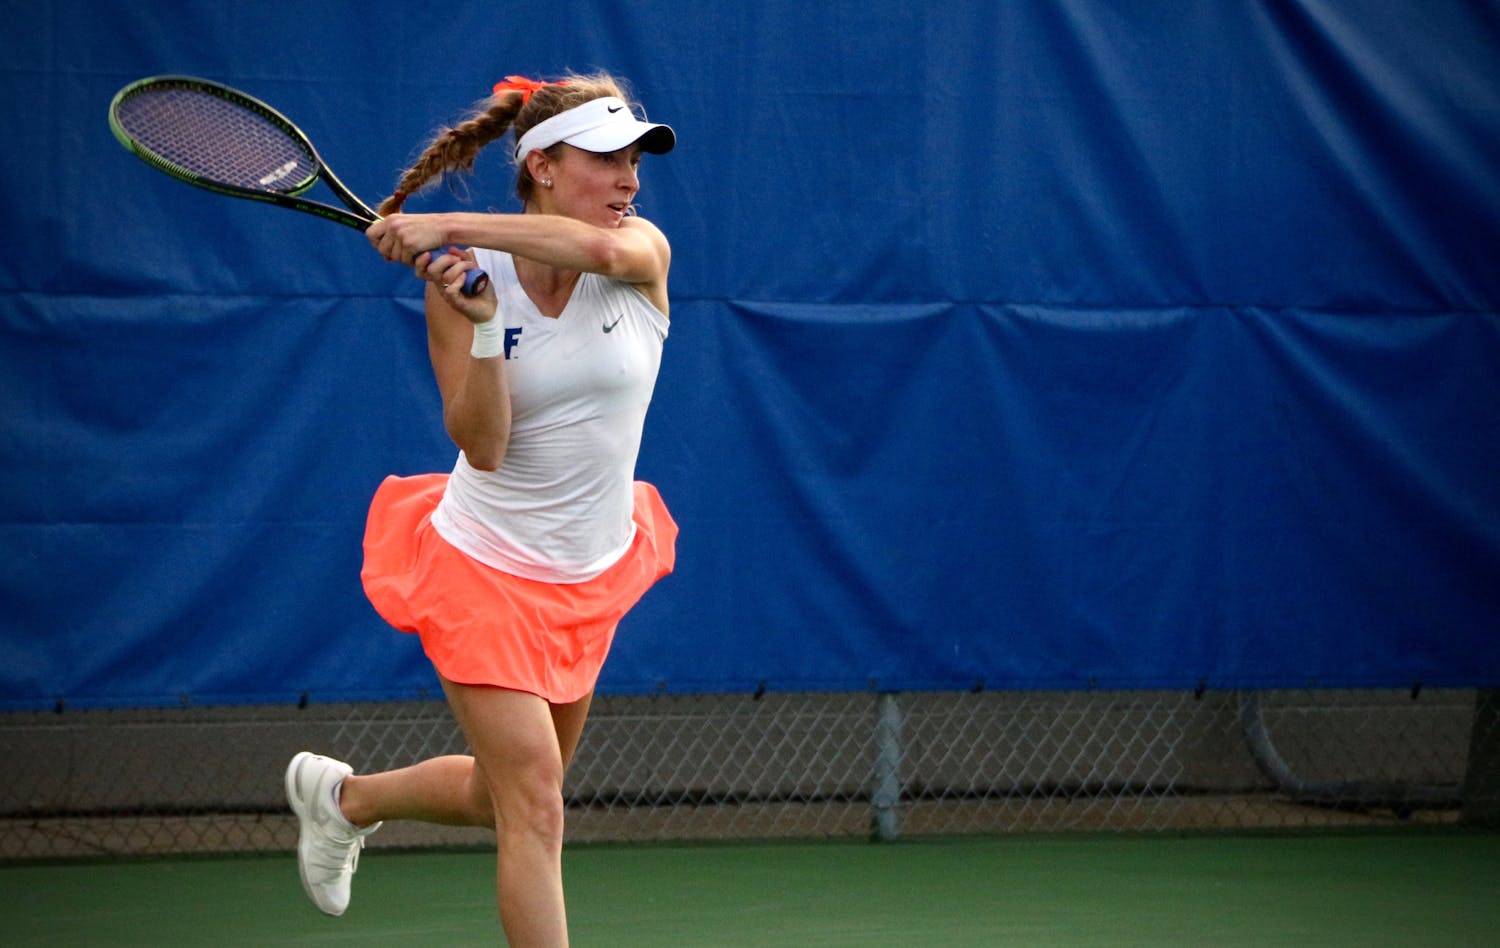 Florida women’s tennis player Josie Kuhlman earned All-SEC First Team honors last season on the way to UF winning its seventh national championship in program history.